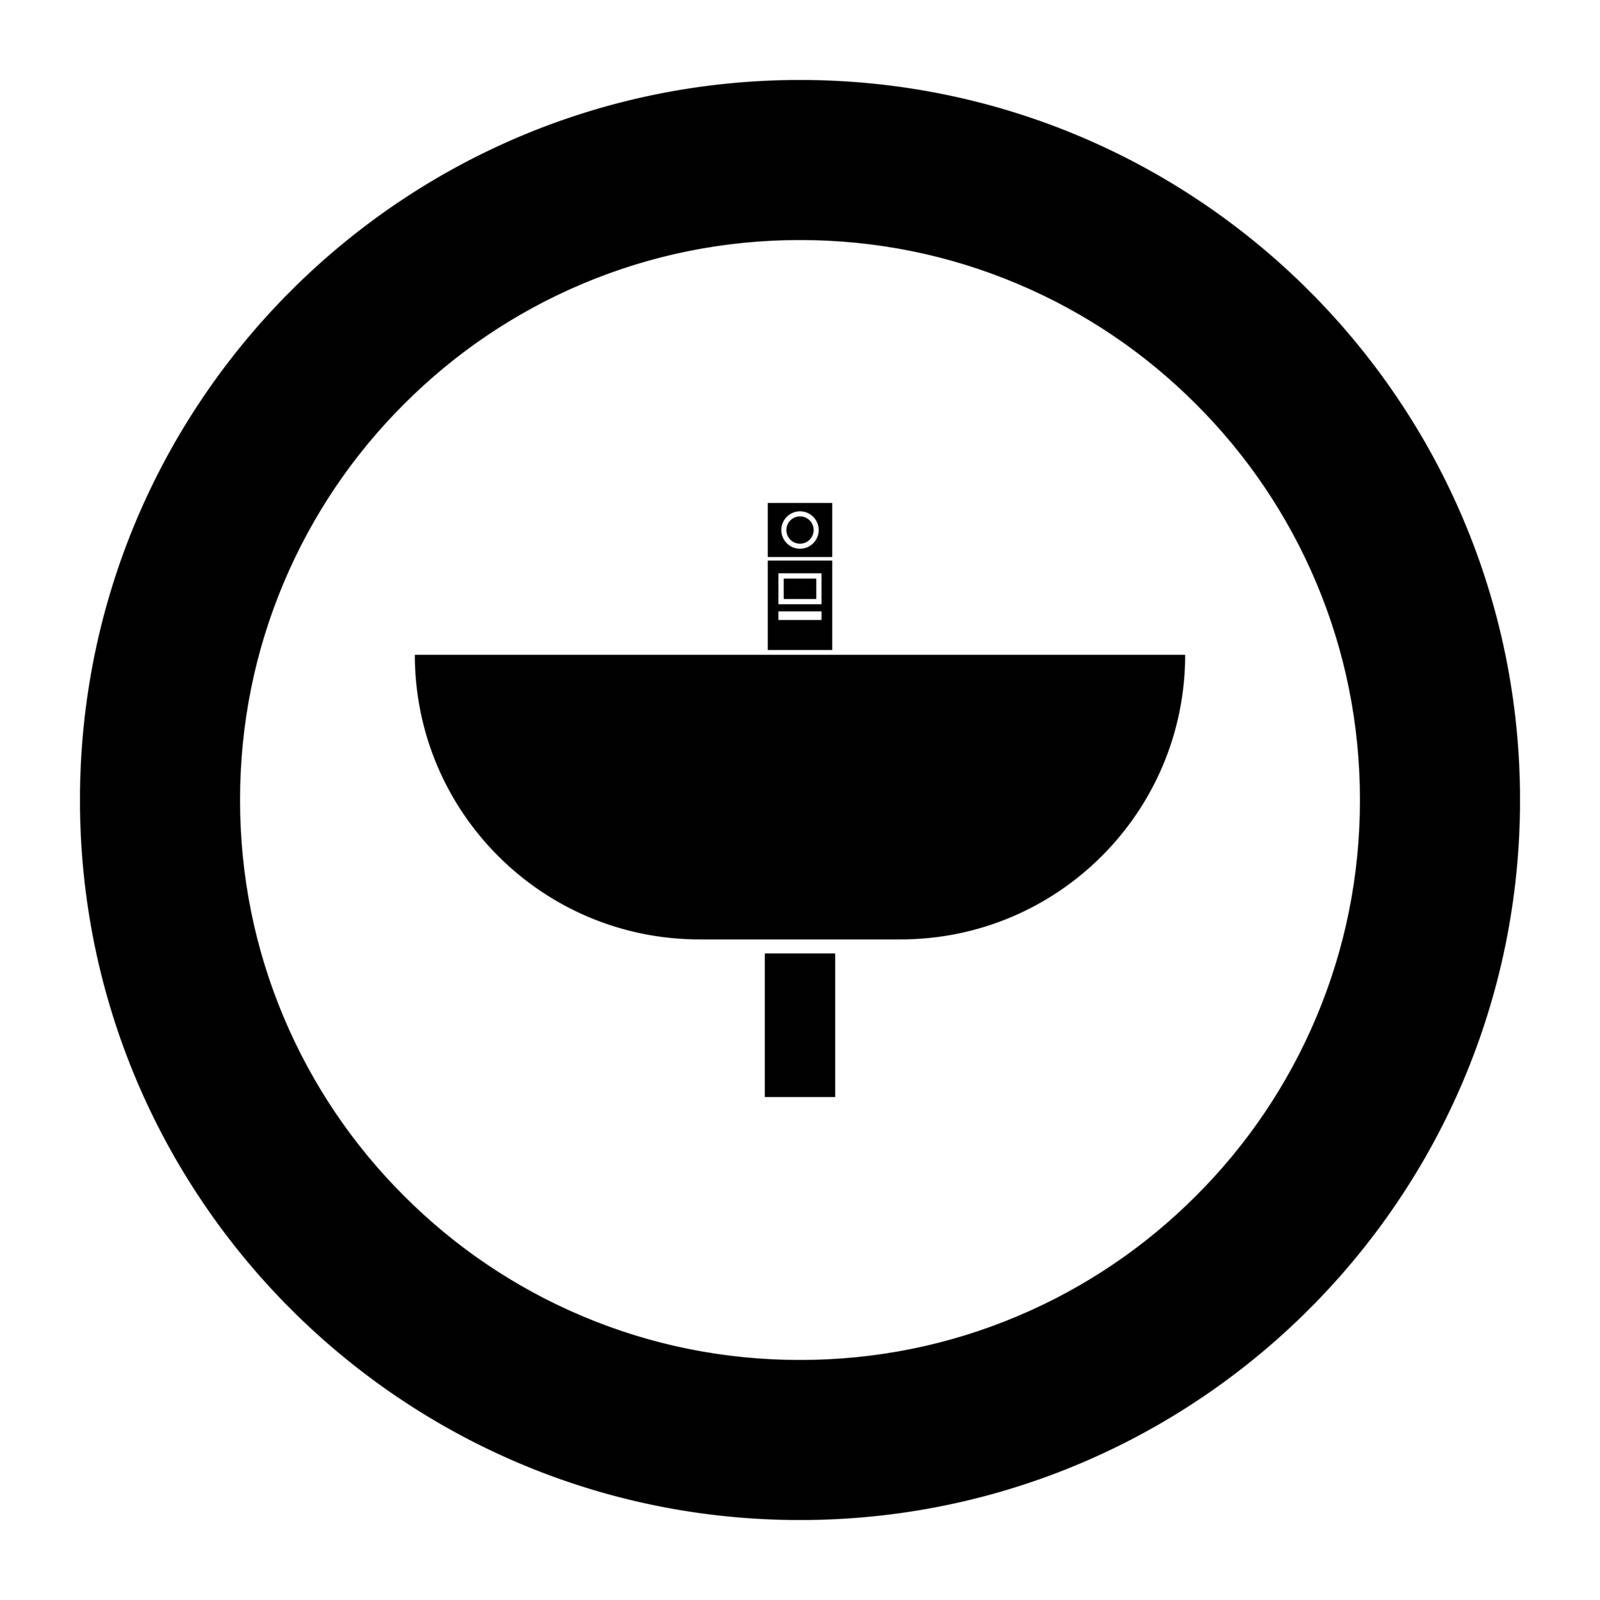 Wash basin icon black color in circle vector illustration isolated